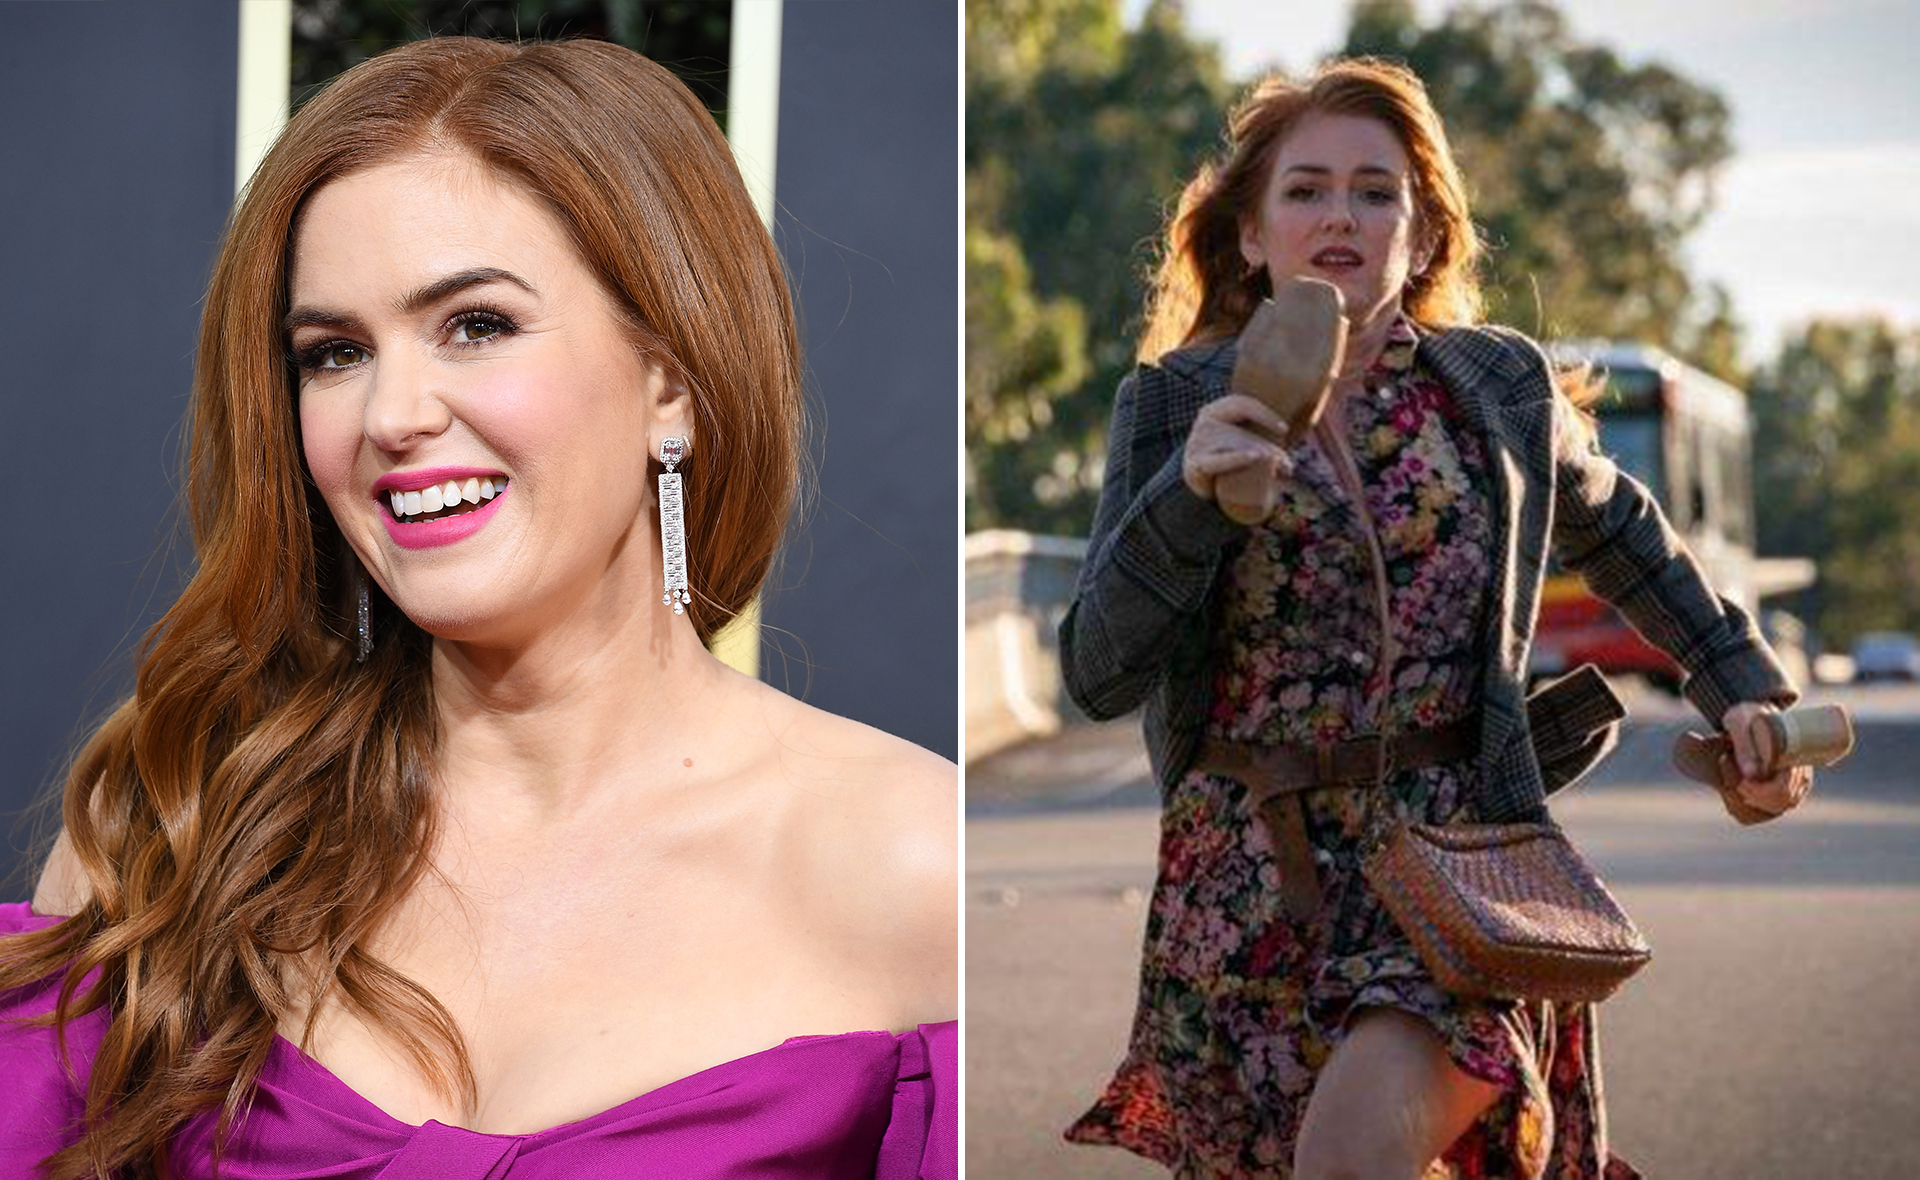 Isla Fisher reveals why she didn’t perform her own stunts in Wolf Like Me: “I’m the opposite of Tom Cruise”